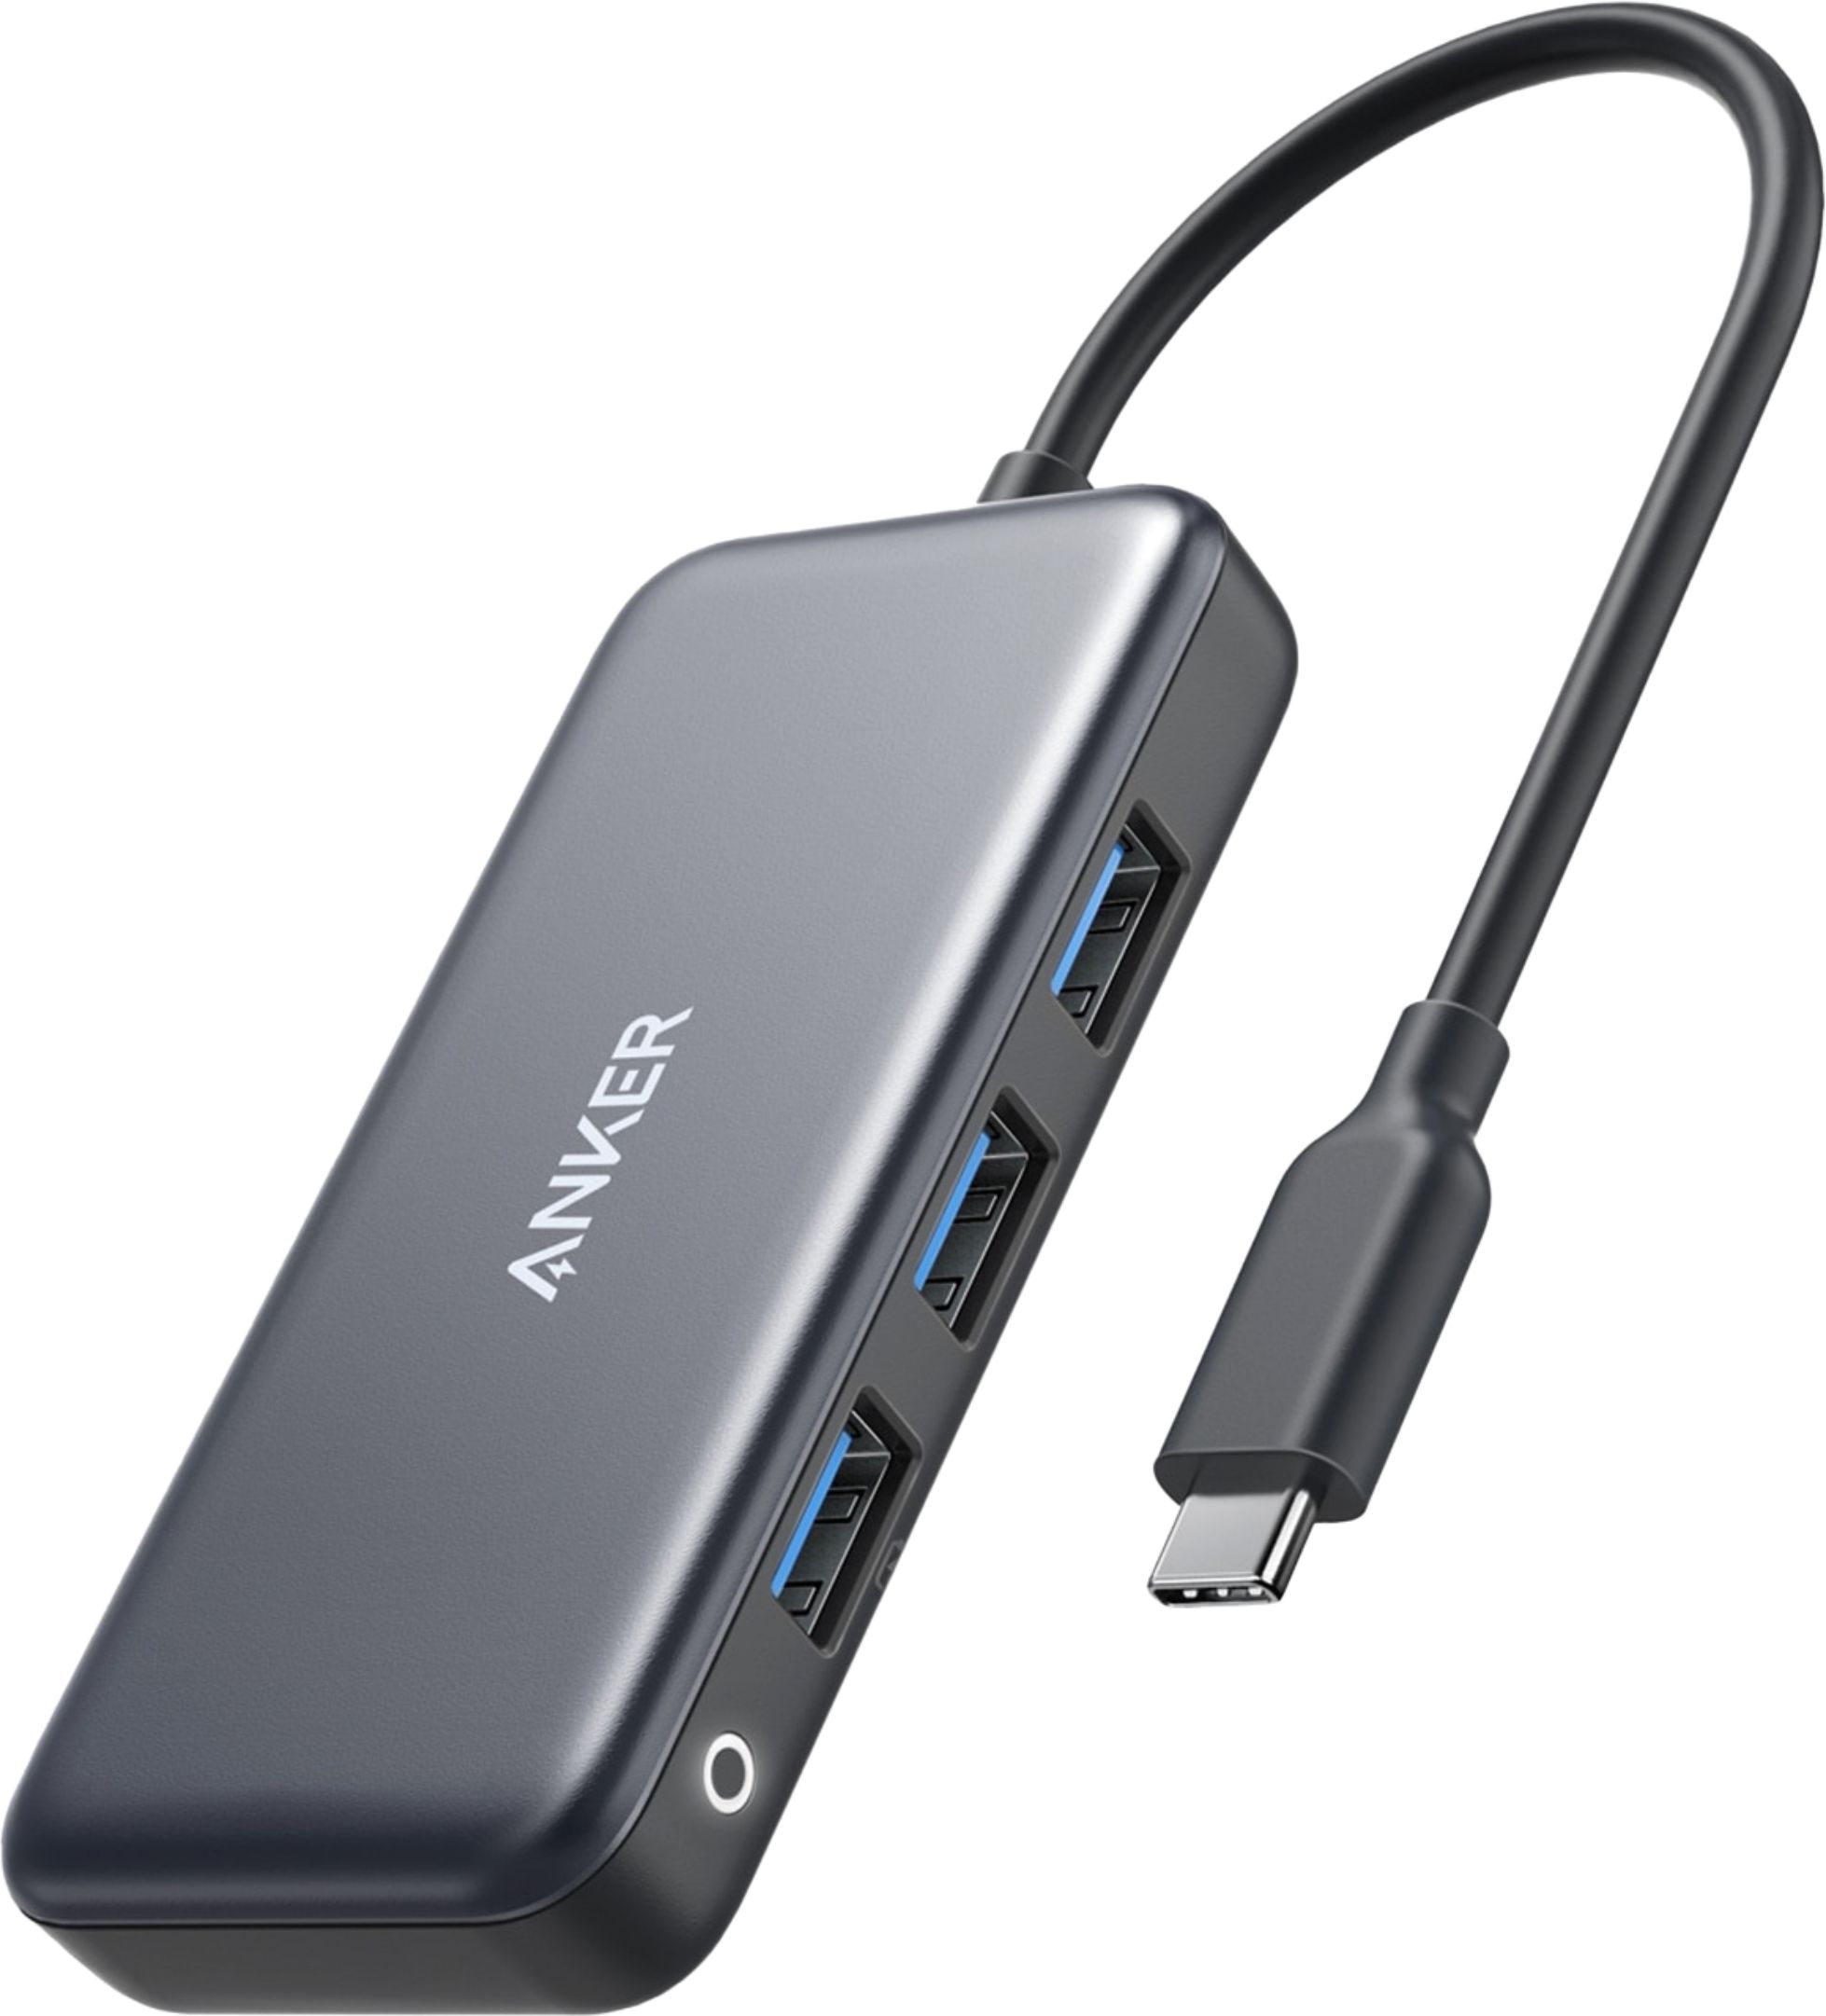 Anker Premium 3-in-1 USB-C Hub with Power Delivery 4K USB C to